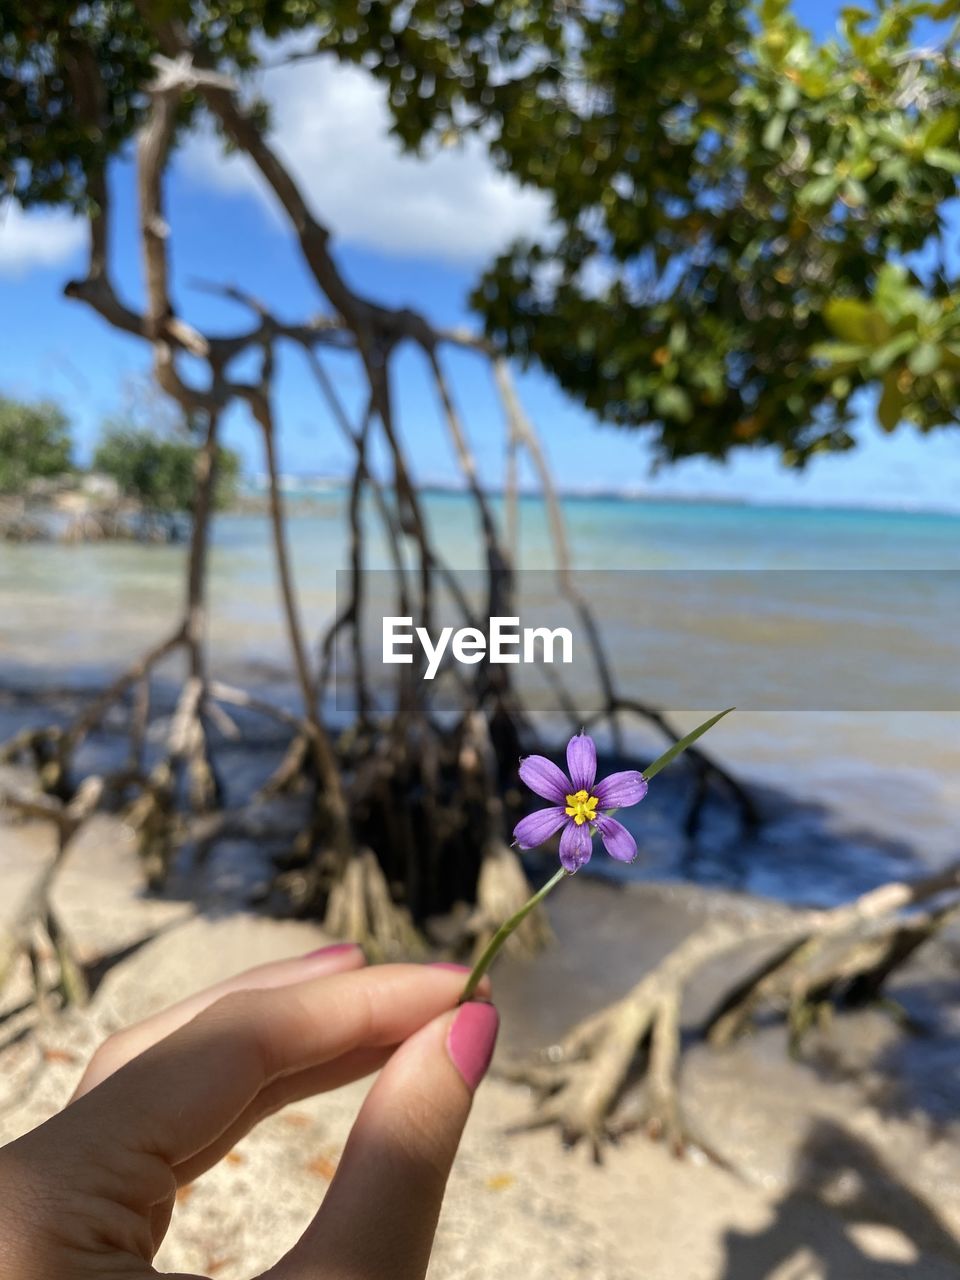 Cropped image of hand holding flowering plant at beach